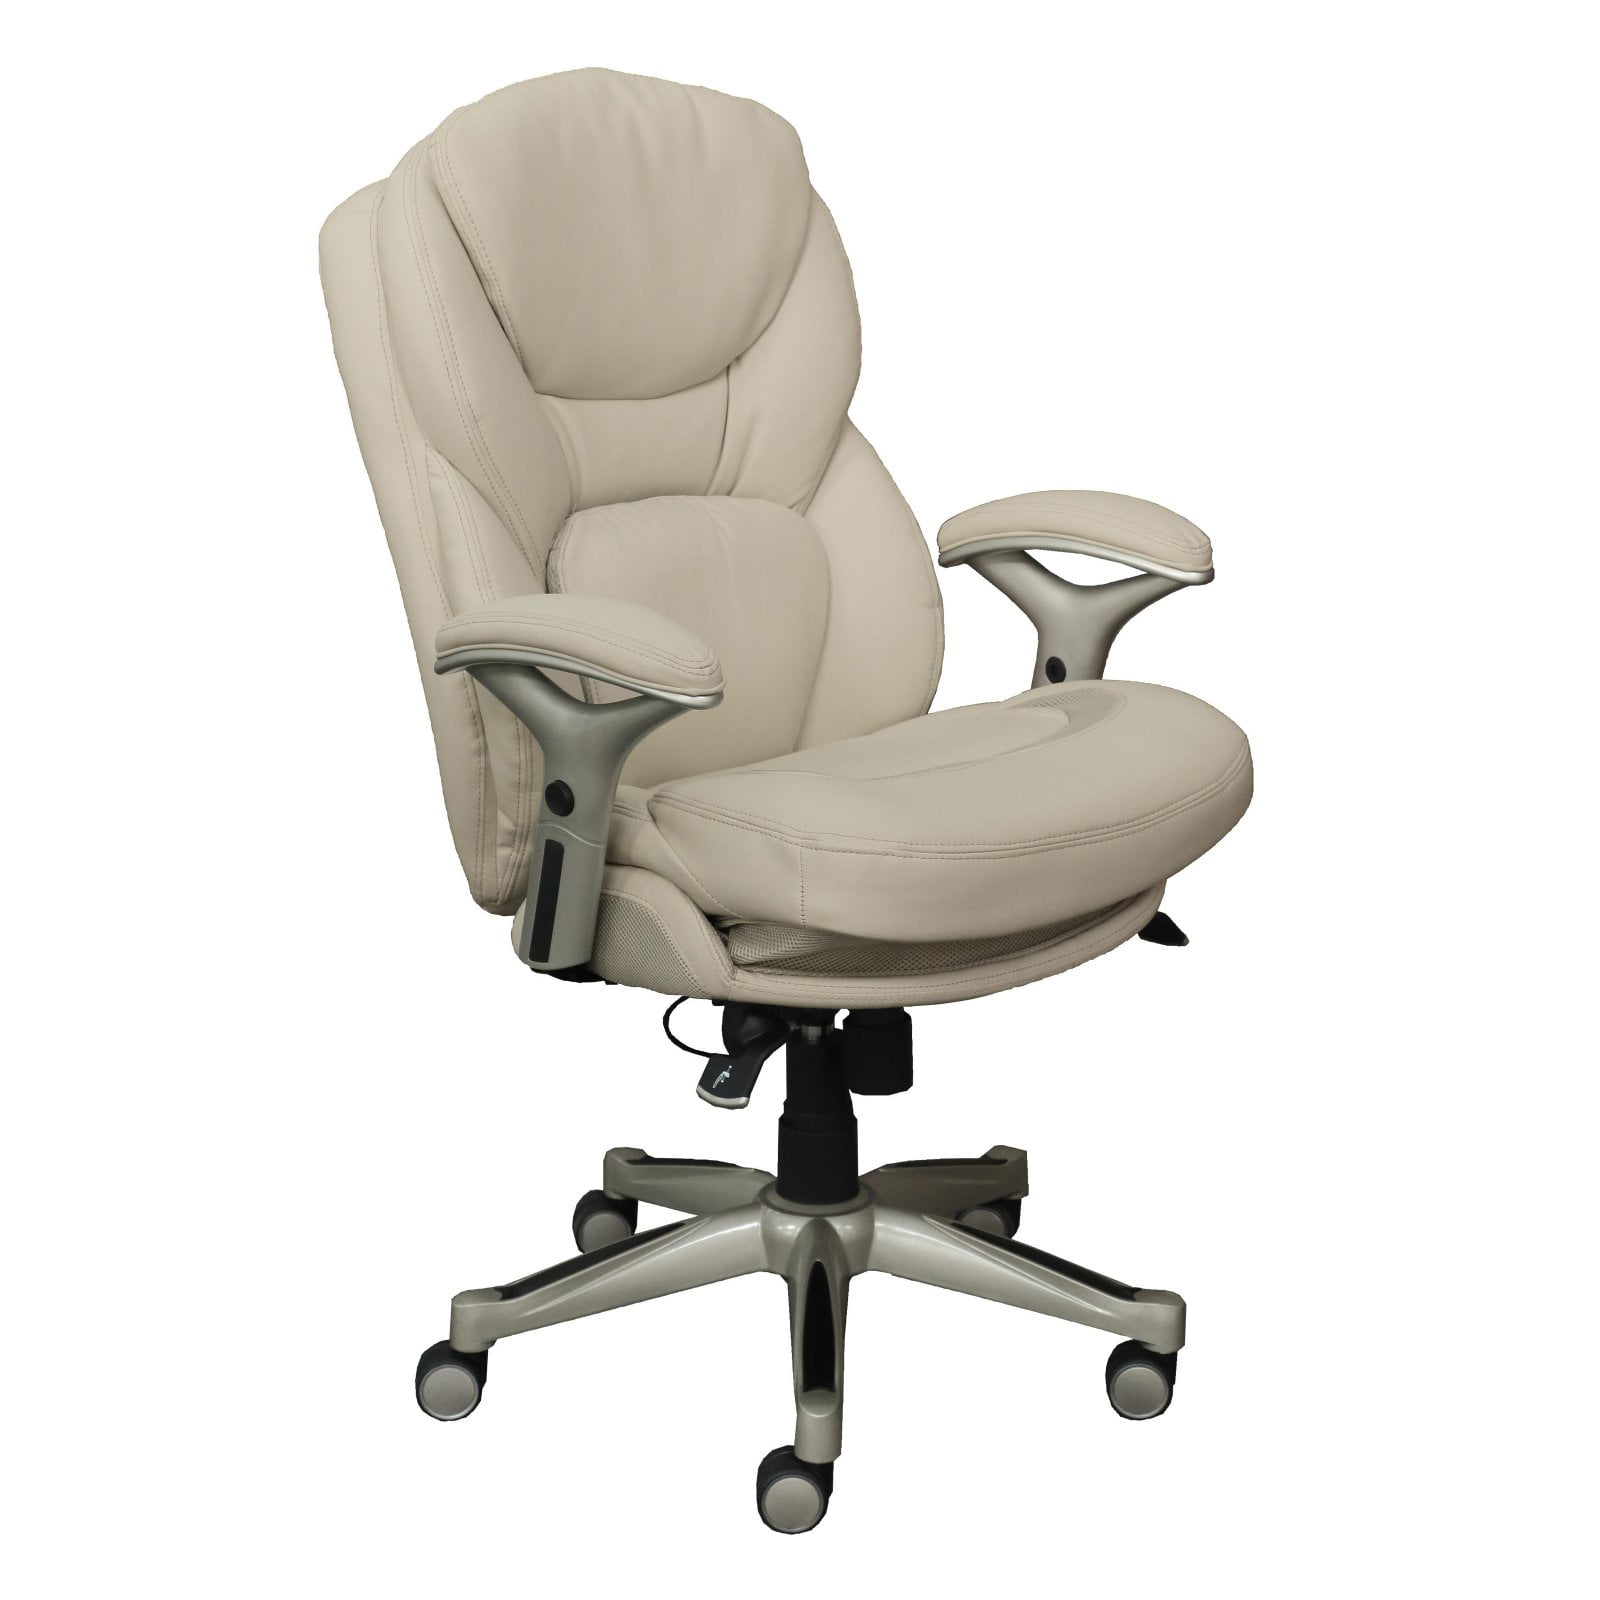 Serta Works Executive Leather Office Chair with Back in Motion